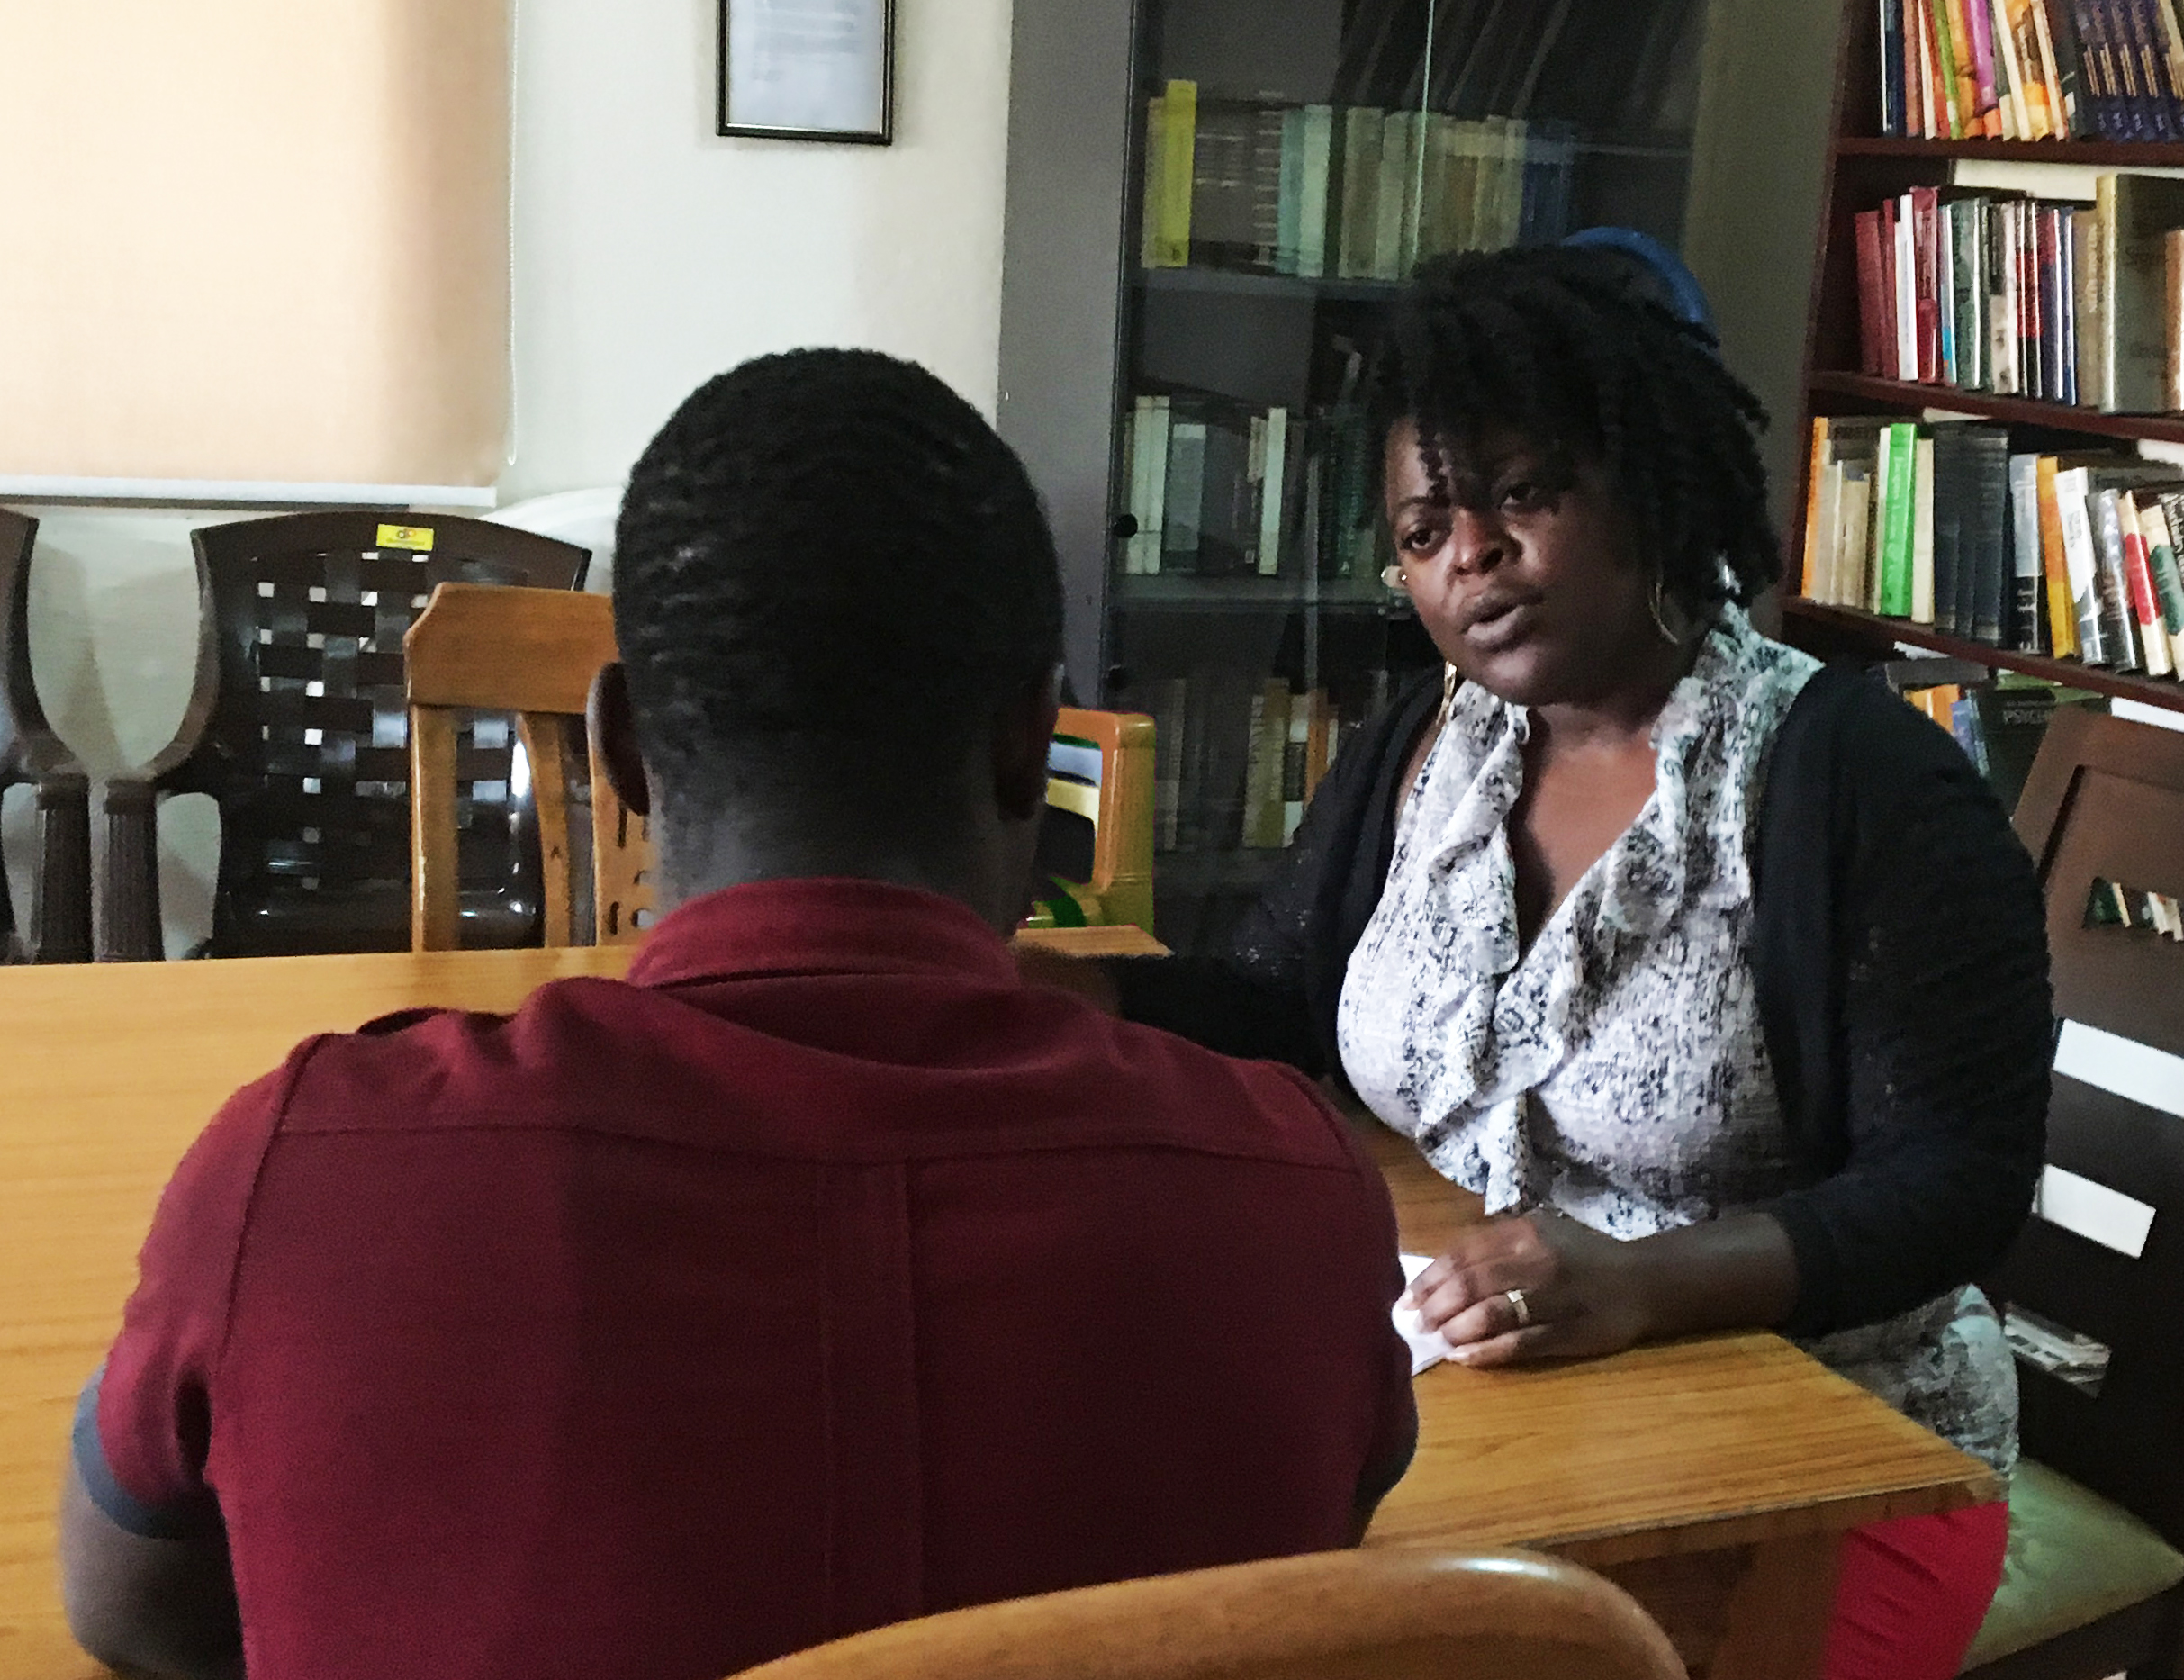 Trainee speaking with a patient in Uganda